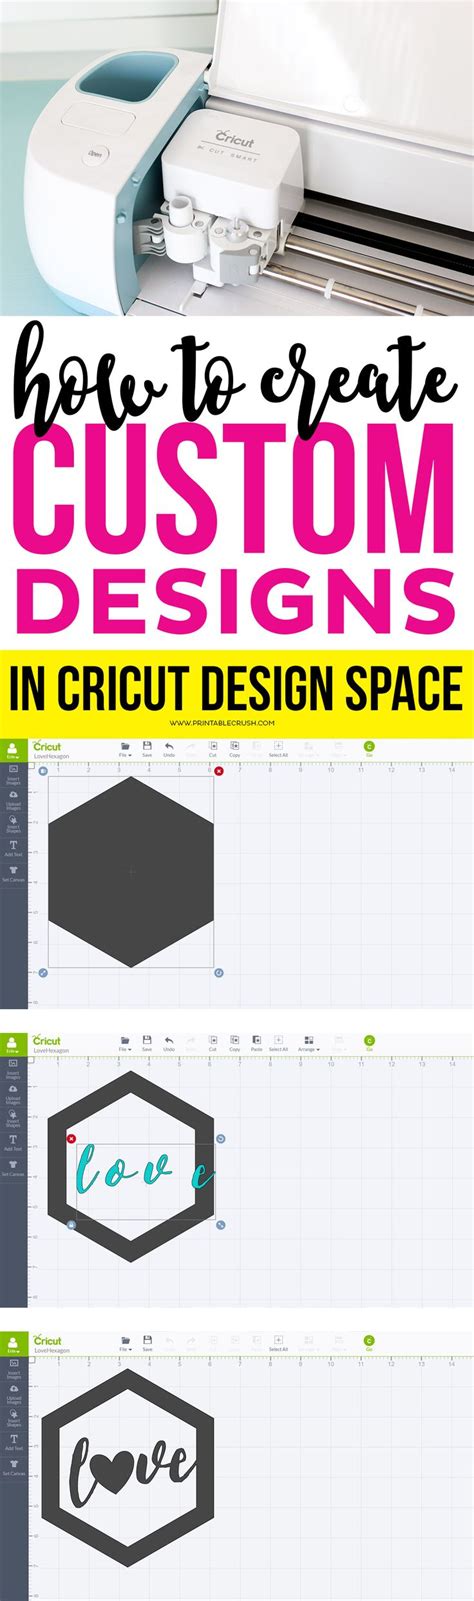 Images About Cricut Ideas From Bloggers And More On Pinterest